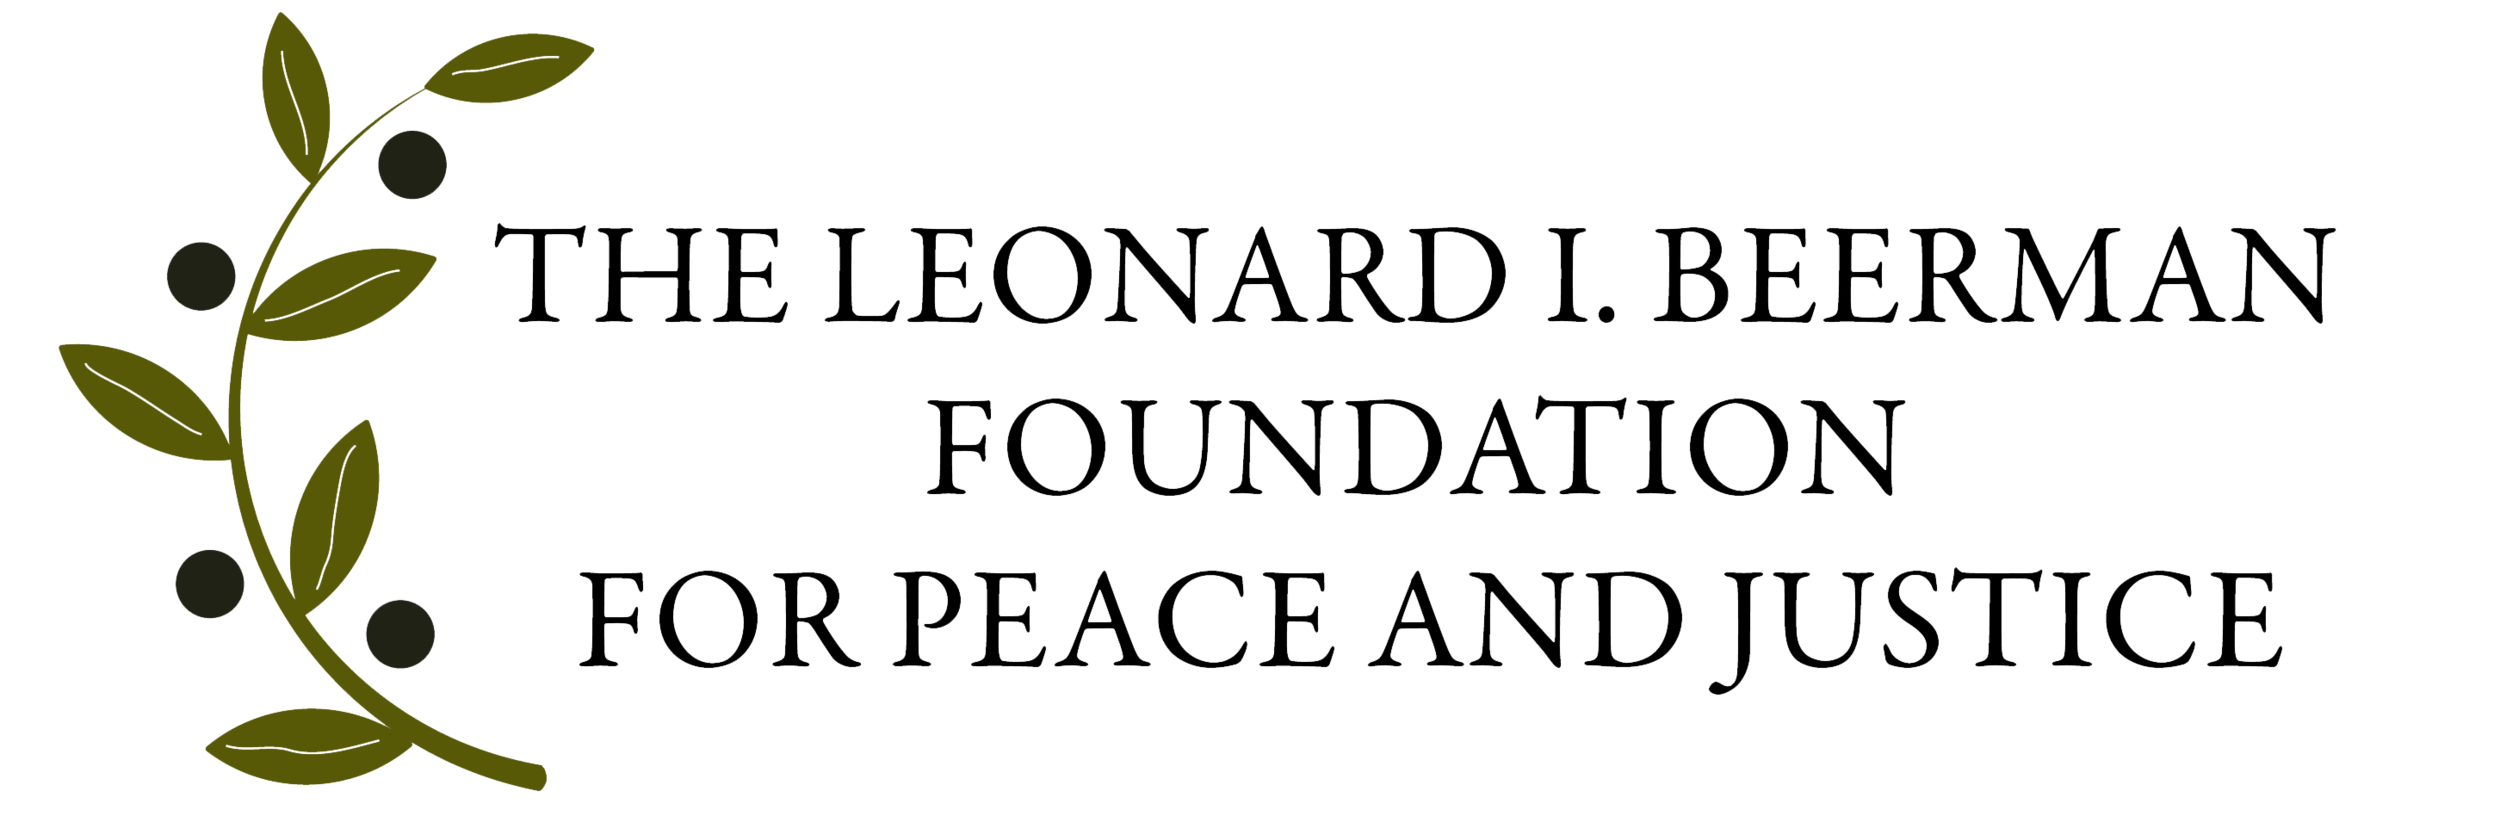 The Leonard I. Beerman Foundation for Peace and Justice